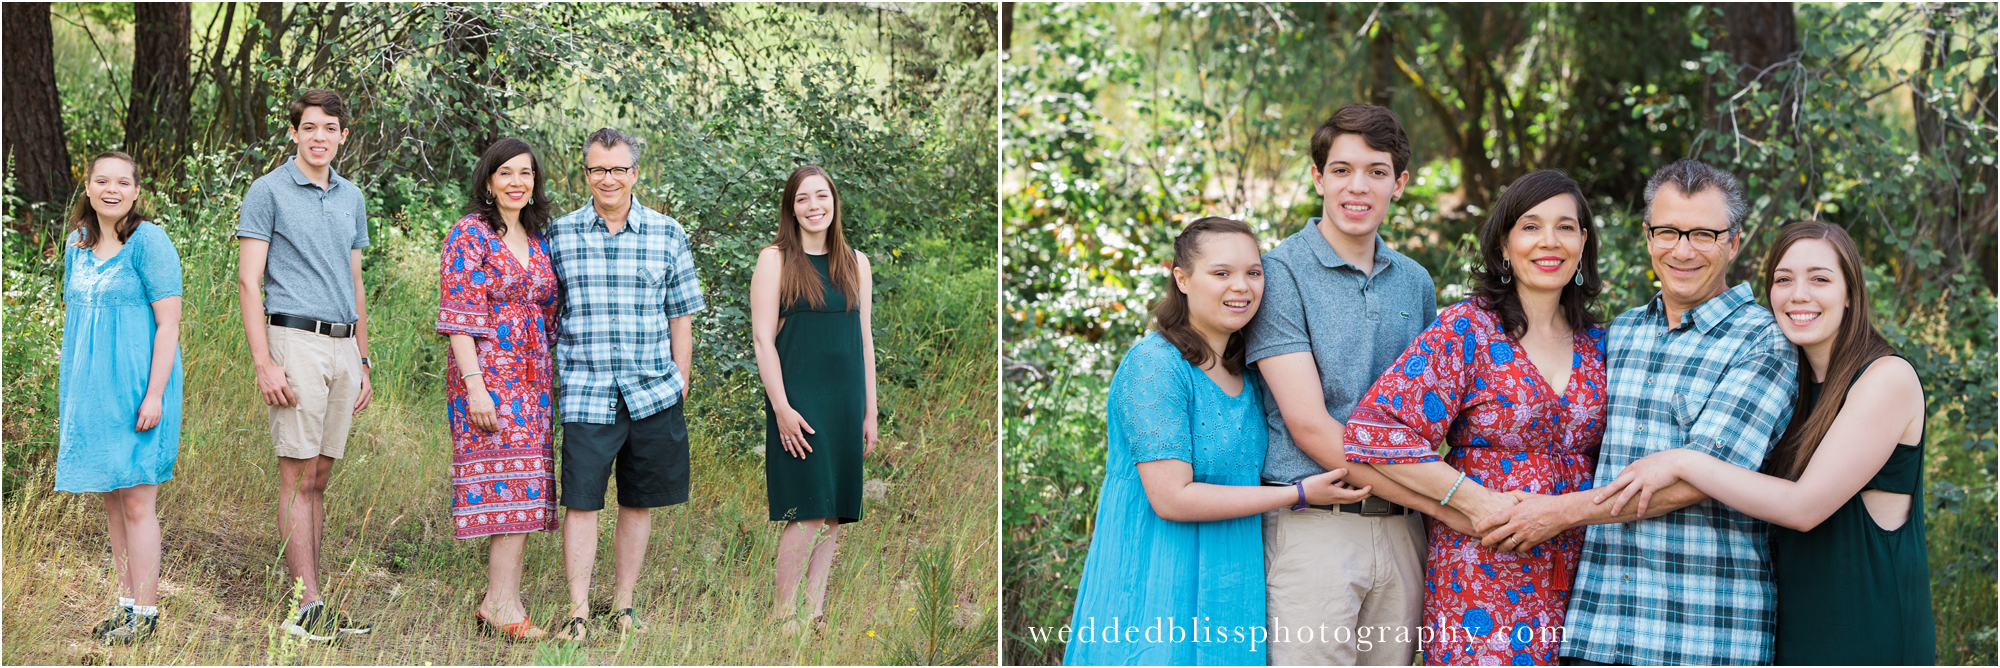 Lake Country Family Photographer | Wedded Bliss Photography | www.weddedblissphotography.com